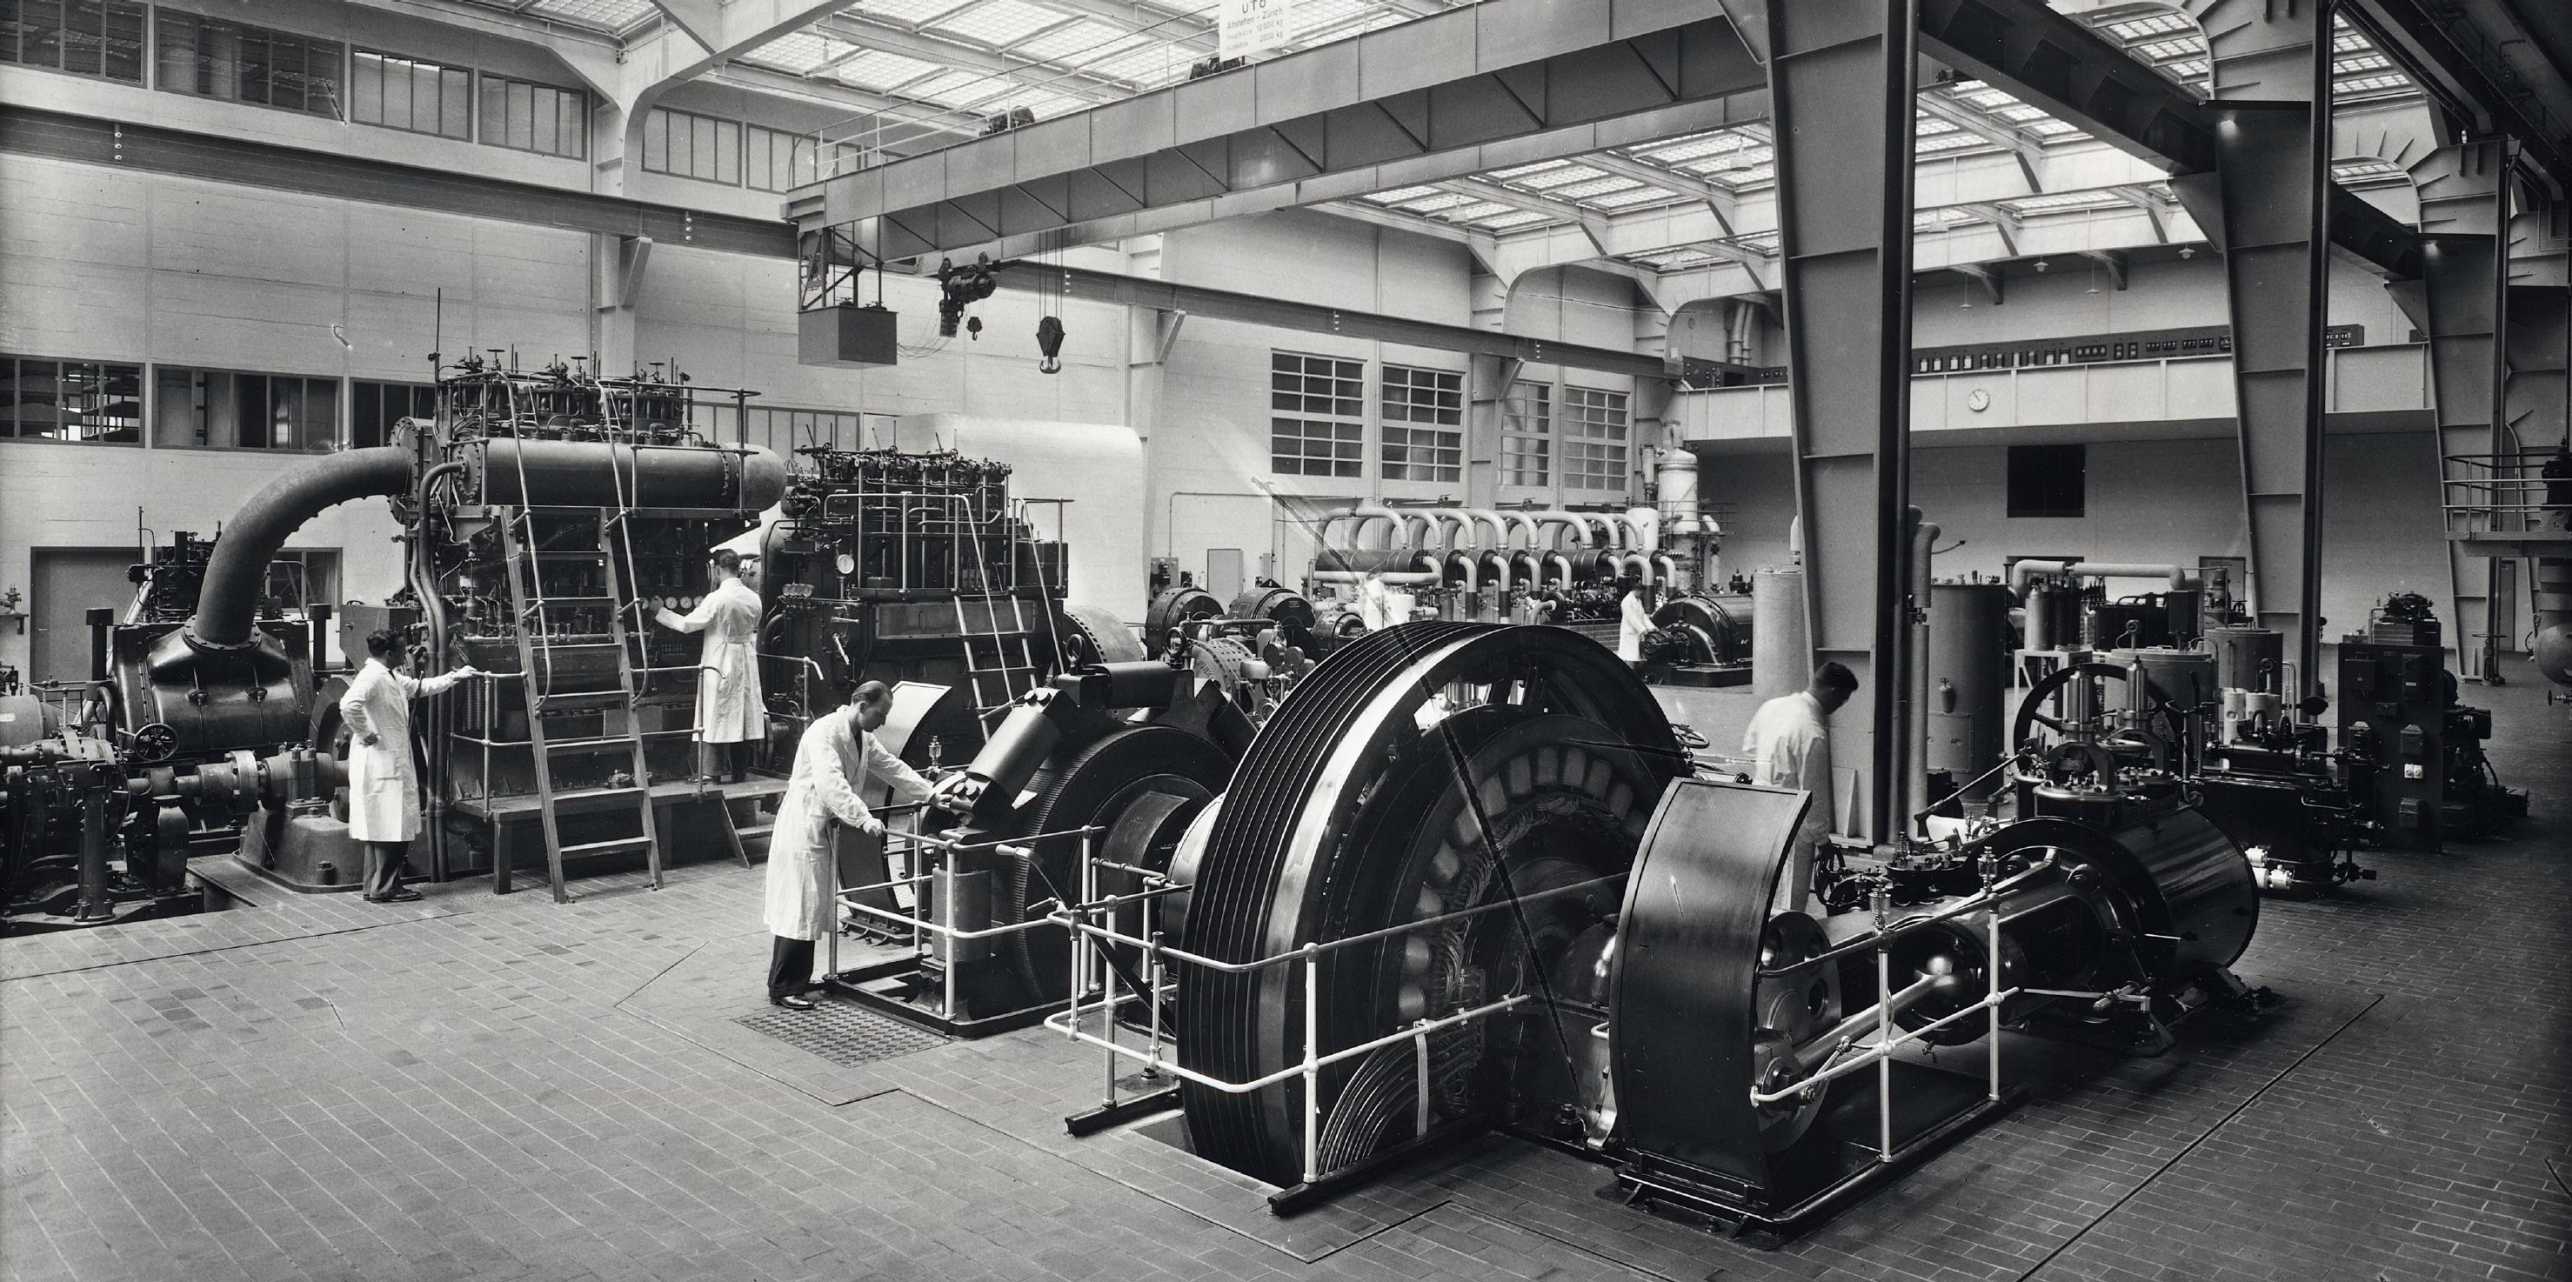 Old black and white picture of a factory building, people working on the machines.